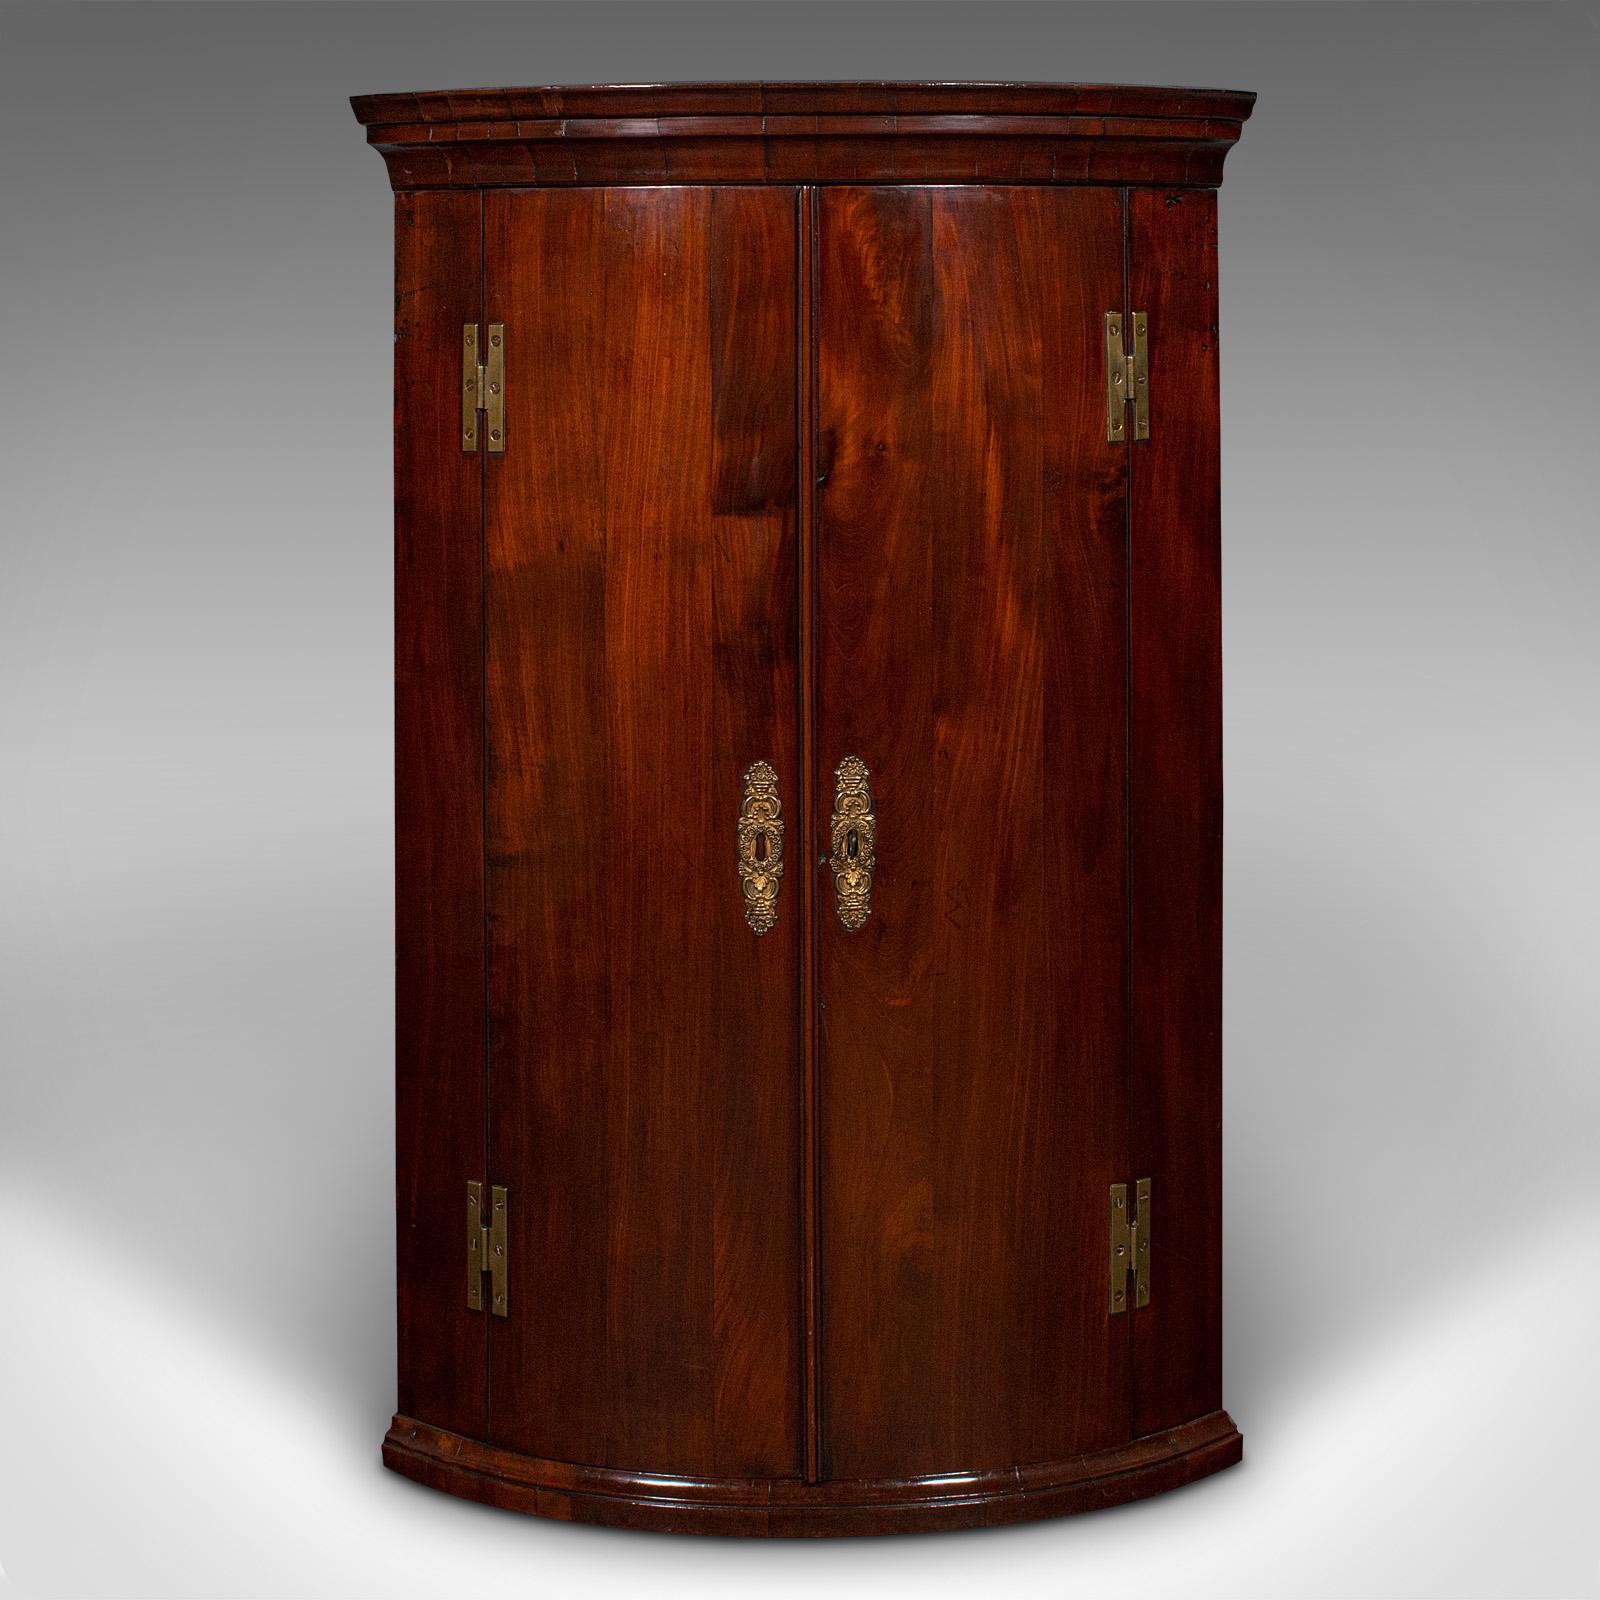 This is an antique bow front corner cabinet. An English, mahogany and oak wall cupboard, dating to the Georgian period, circa 1770.

Superb craftsmanship and figuring to this fine Georgian example
Displays a desirable aged patina and in good